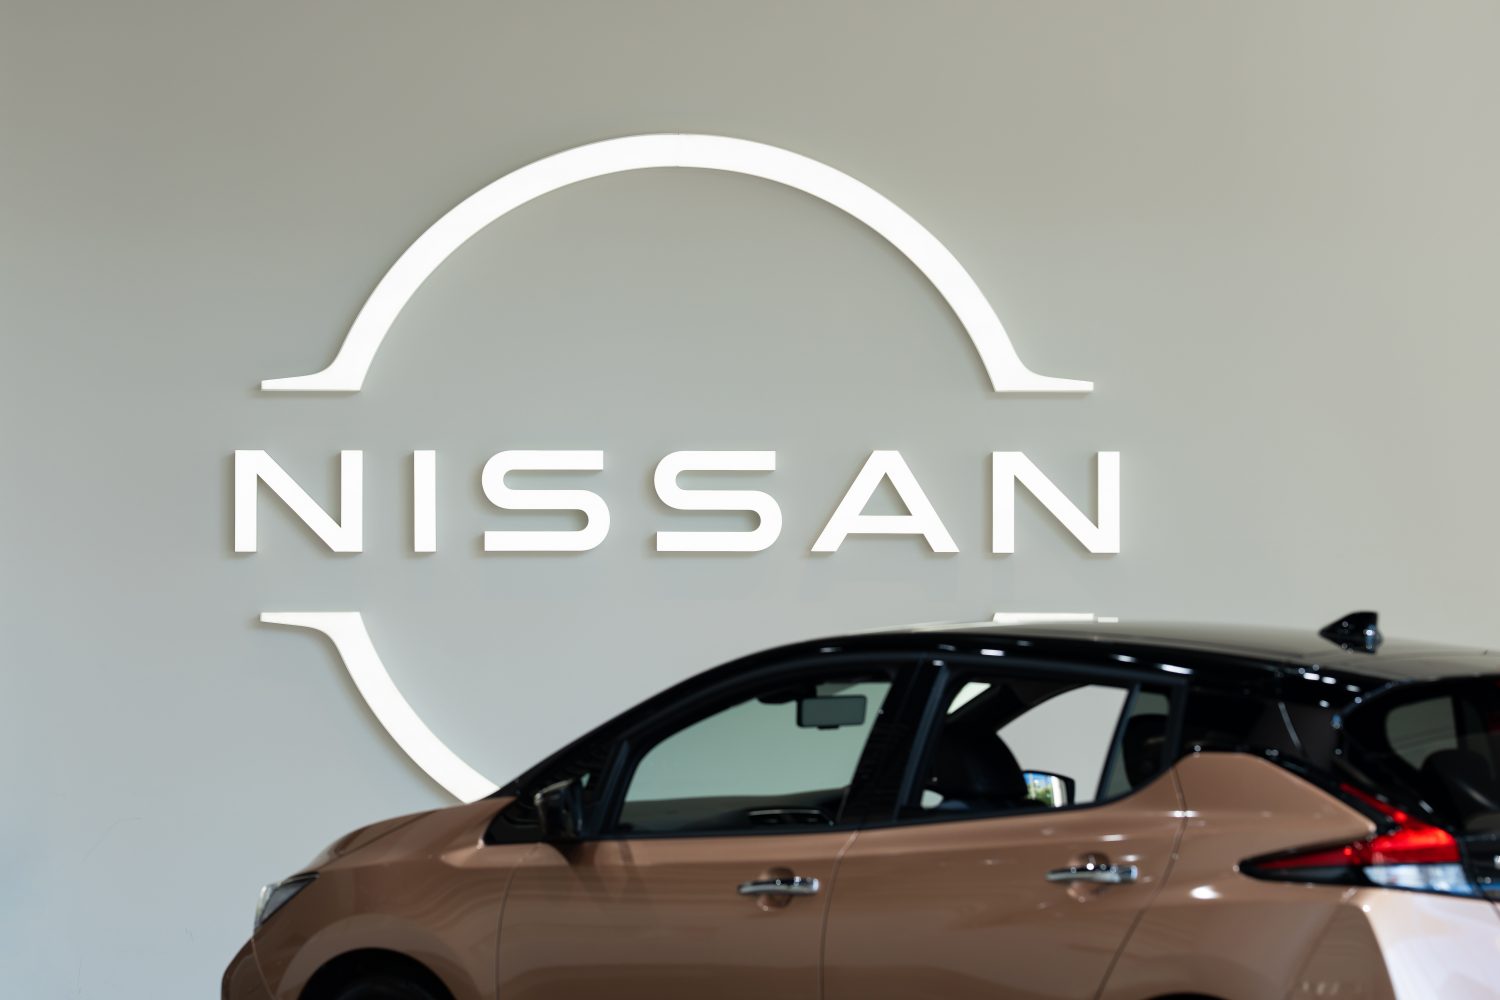 Earlier this week: Nissan plans to boost sales by 1 million units and slash EV costs through its "Arc" strategy by 2027.